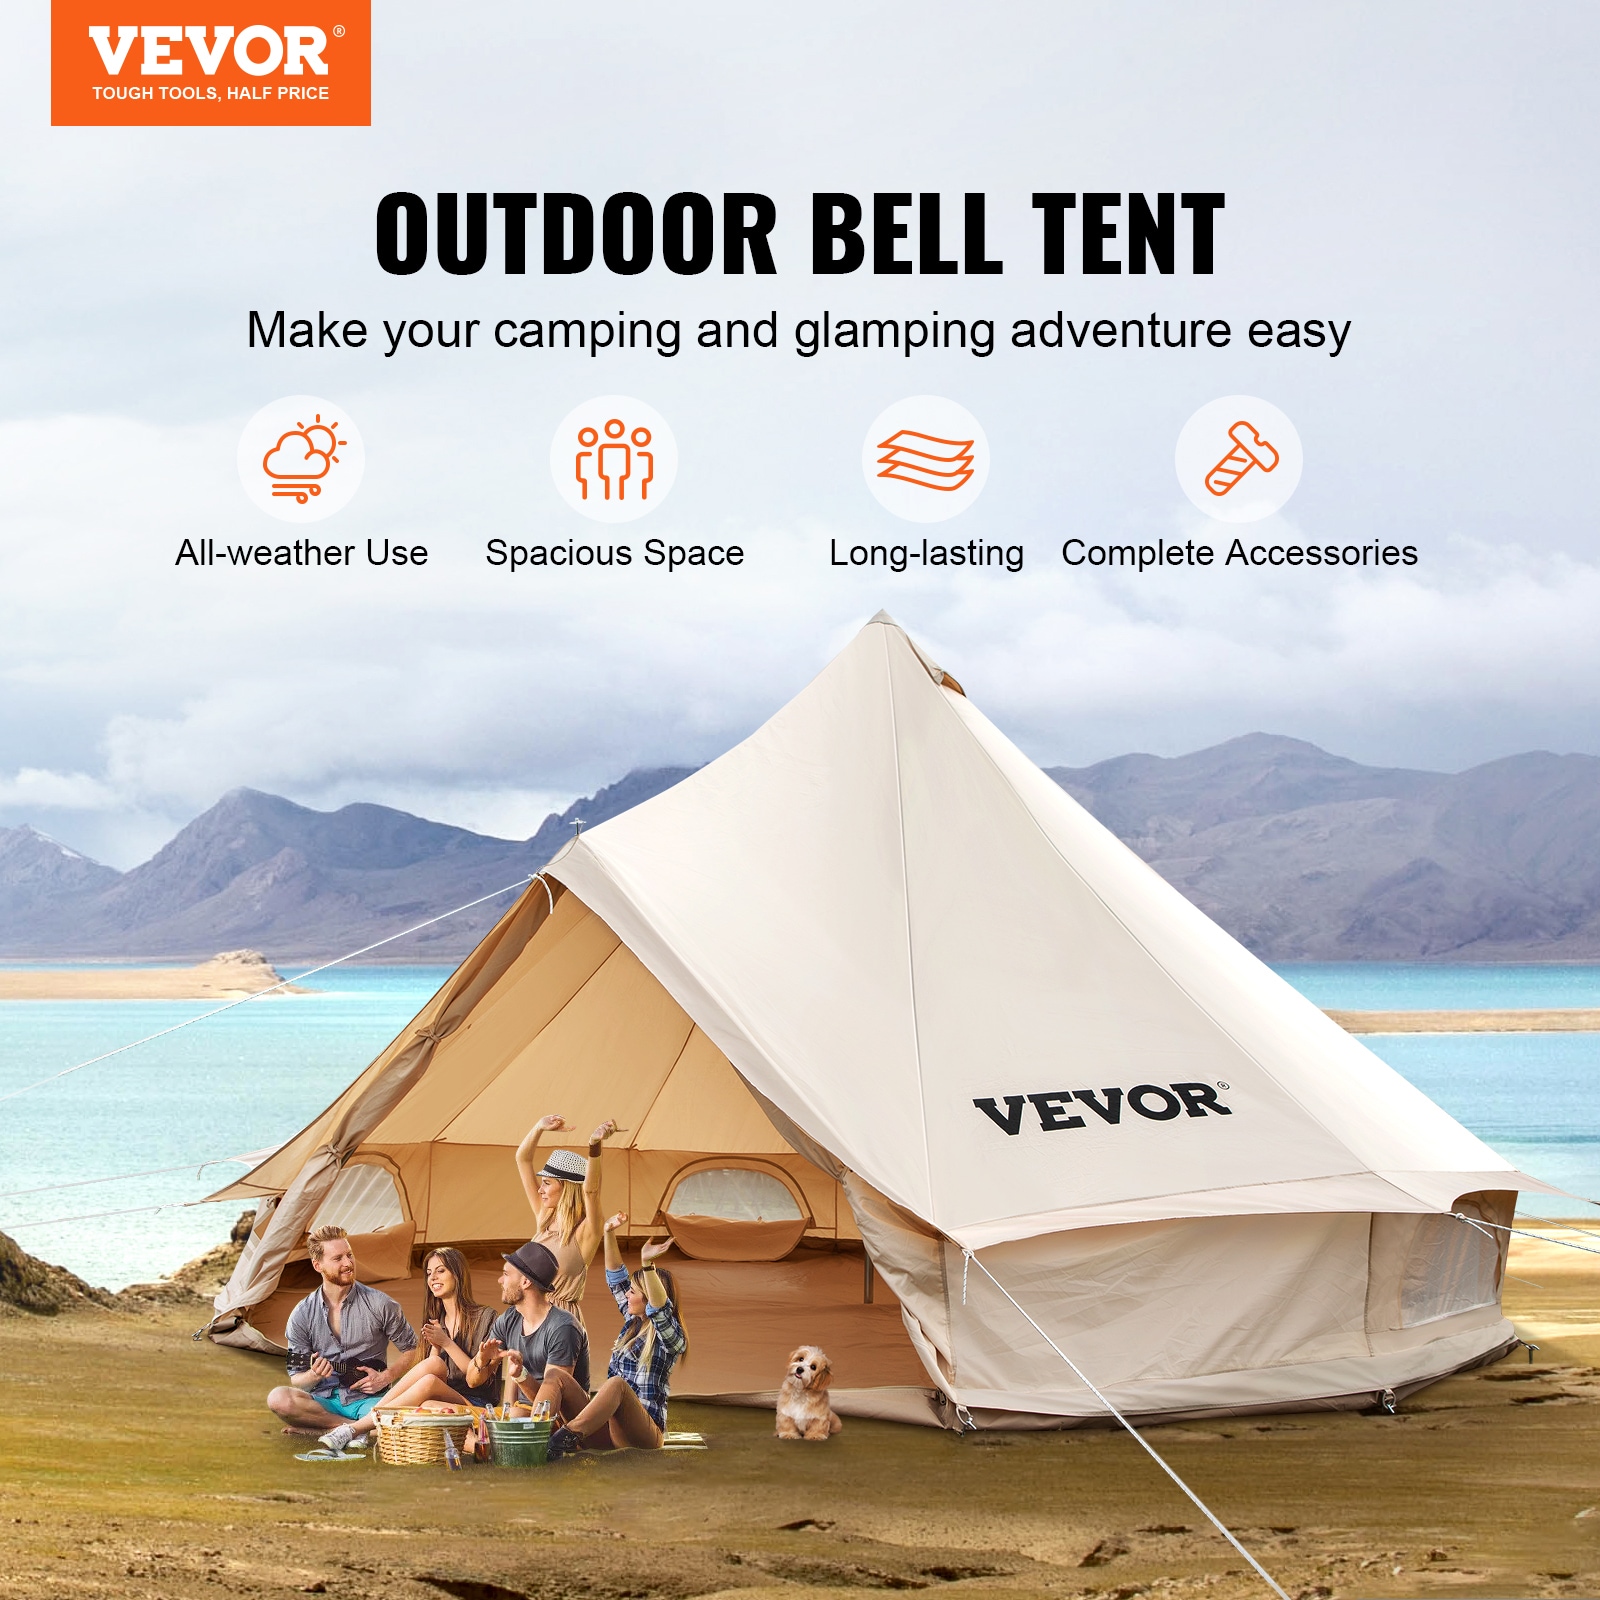 VEVOR 5m Cotton Canvas Camping Tent Polyester 12-Person Tent in